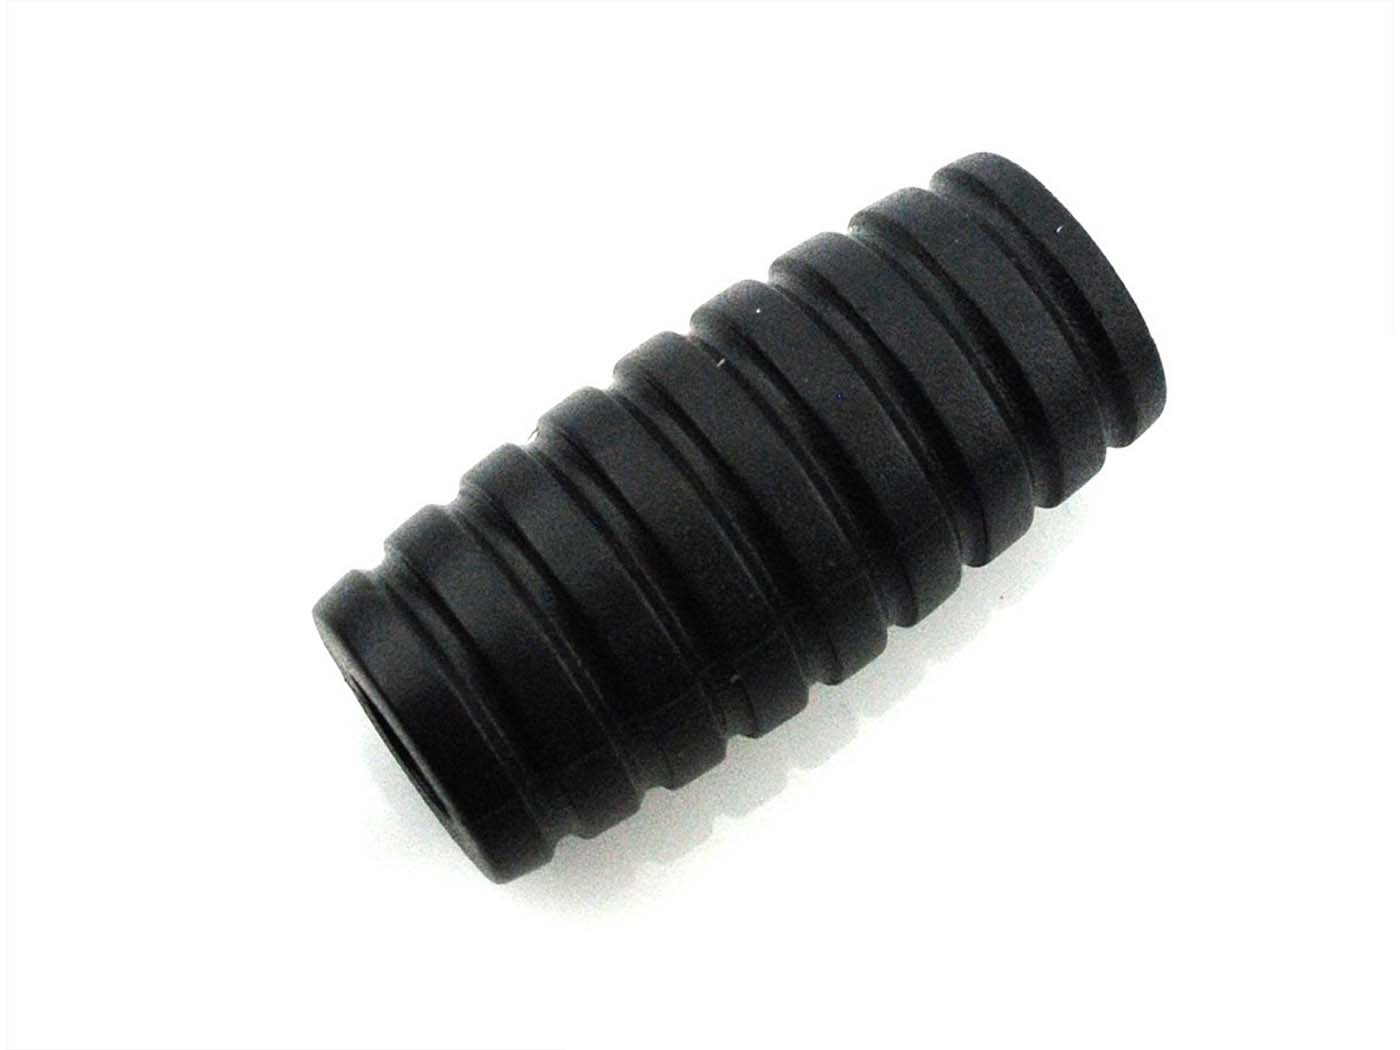 Shift Lever Rubber Universal For Moped Moped Light Motorcycle Motorcycle